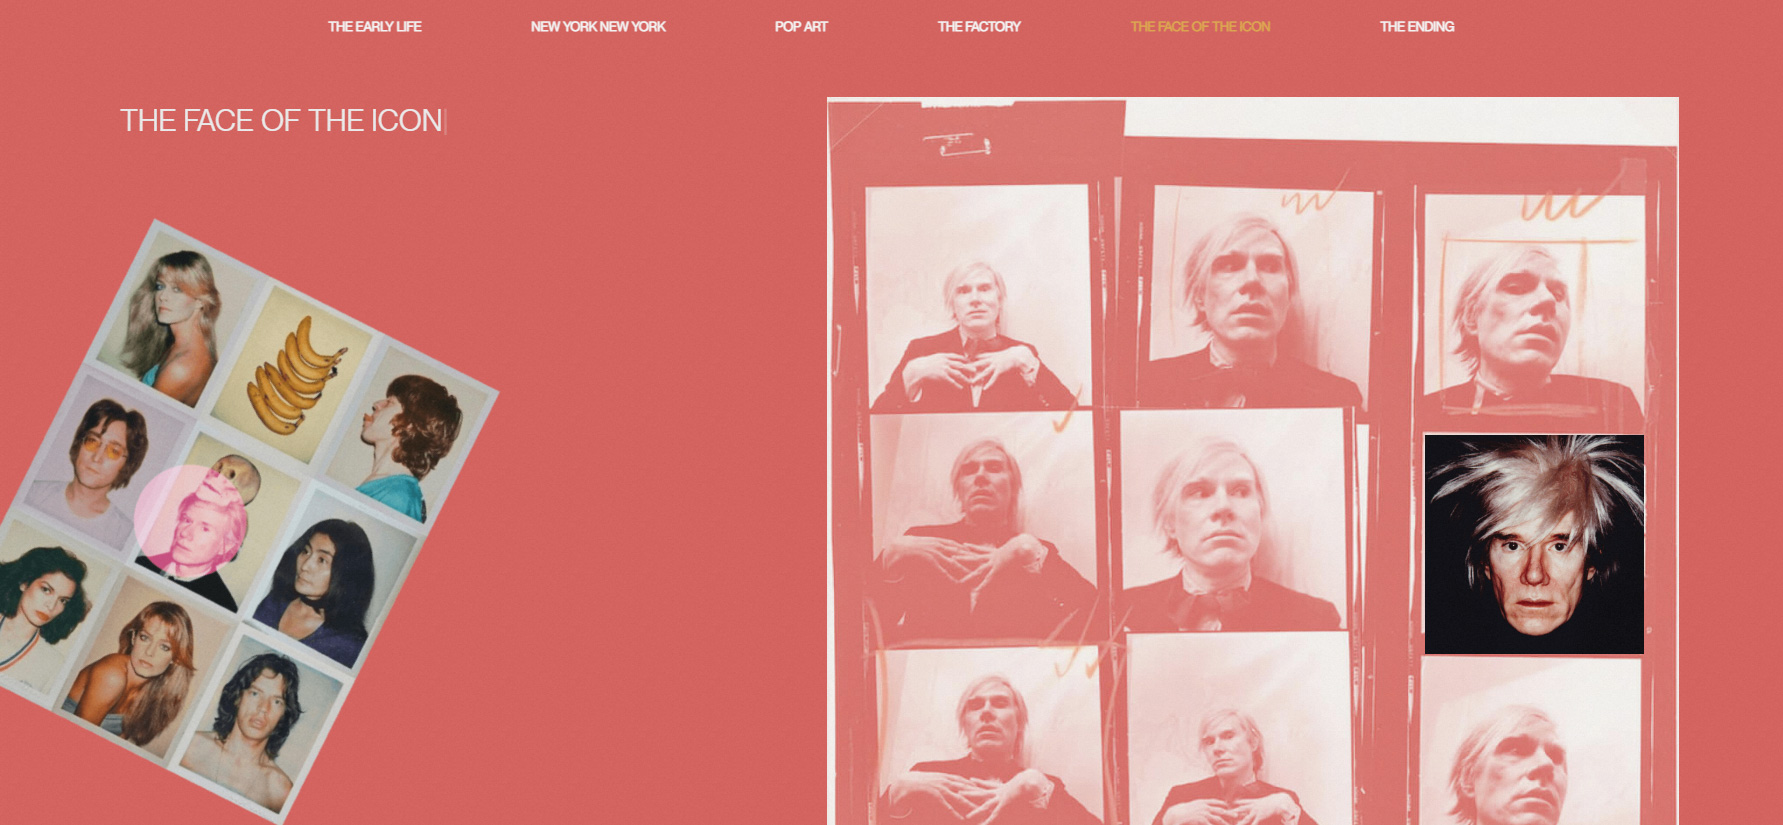 Who is Andy Warhol? - Website of the Day